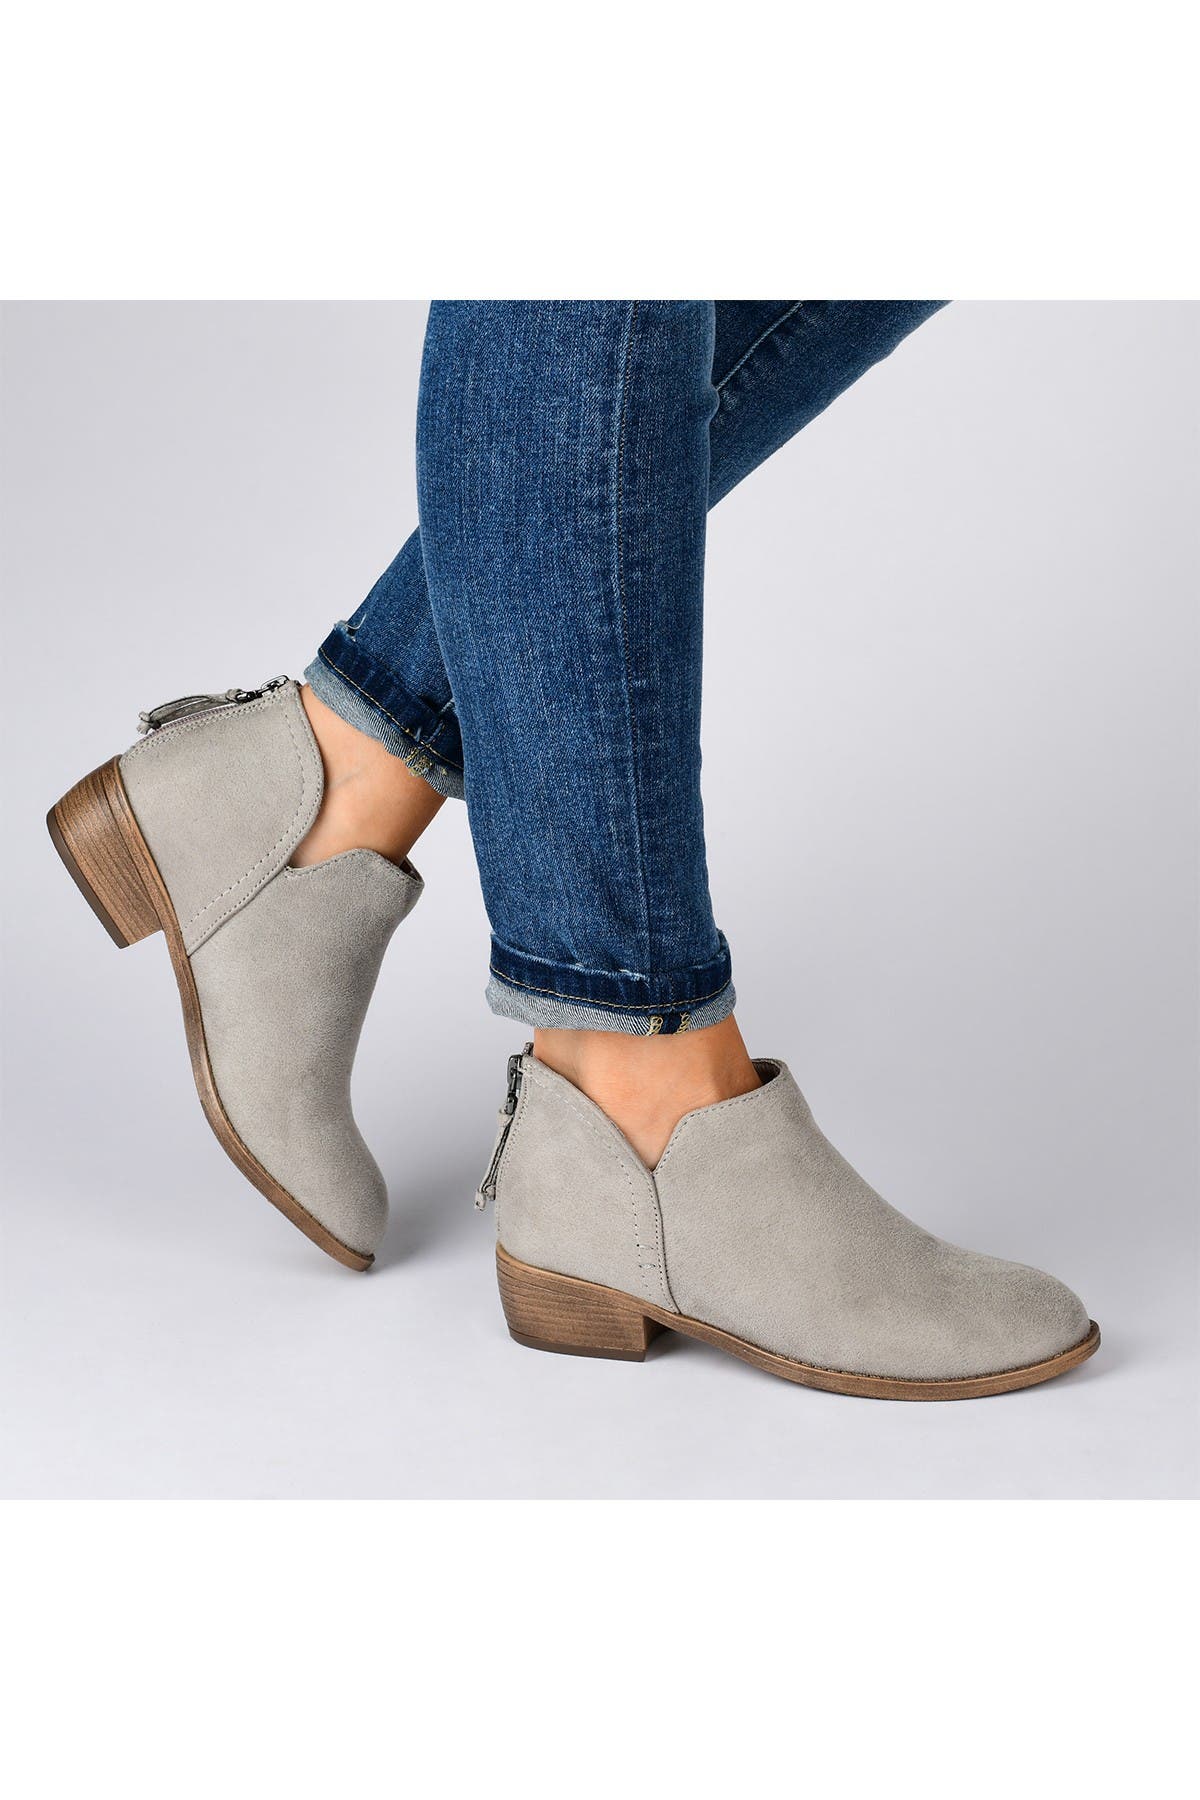 journee collection livvy bootie